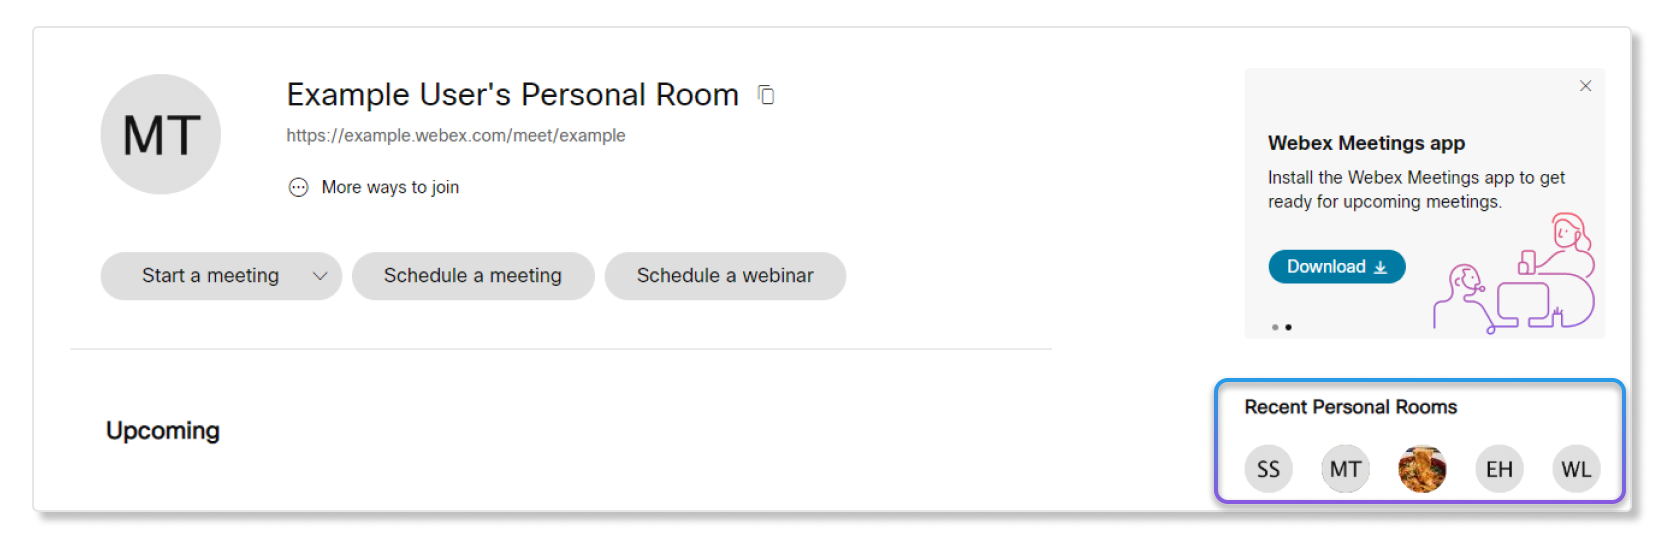 Recent Personal Rooms example in a Webex site